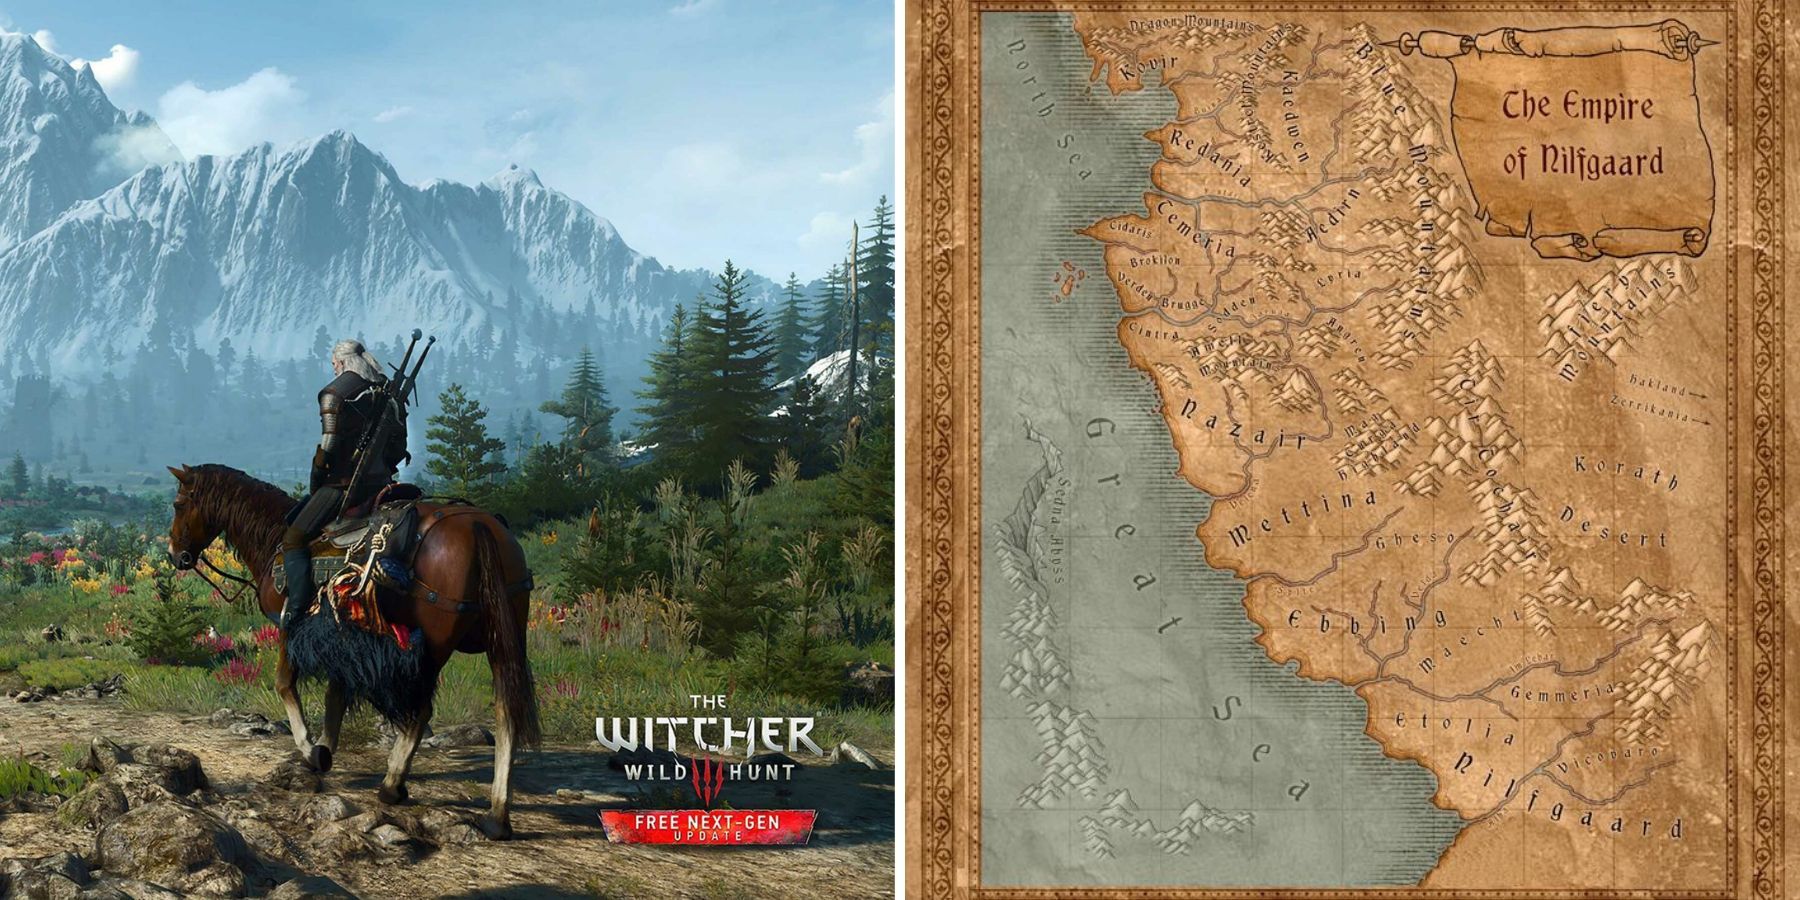 Expliaining the history of The Continent in The Witcher 3